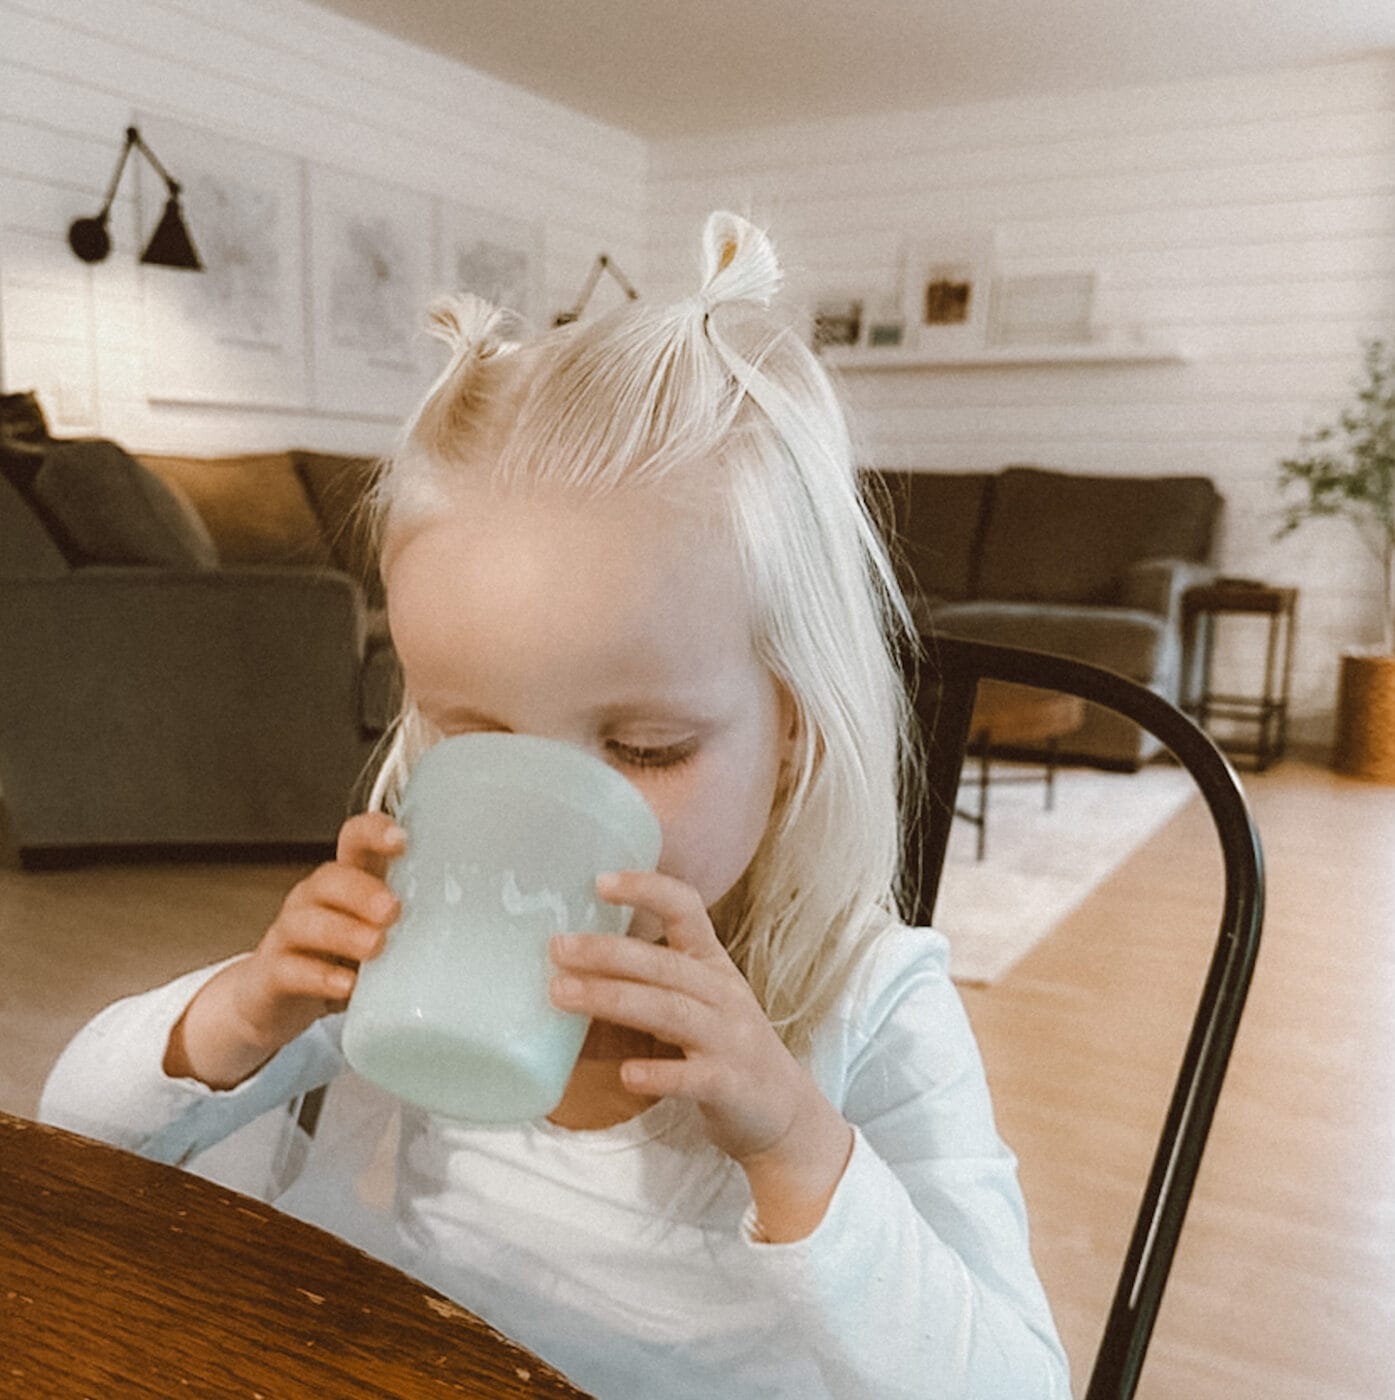 By offering cow's milk to your toddler in an open cup they will be less likely to exceed the recommended 16 ounces of milk per day, and still have room to meet their nutritional needs with food.